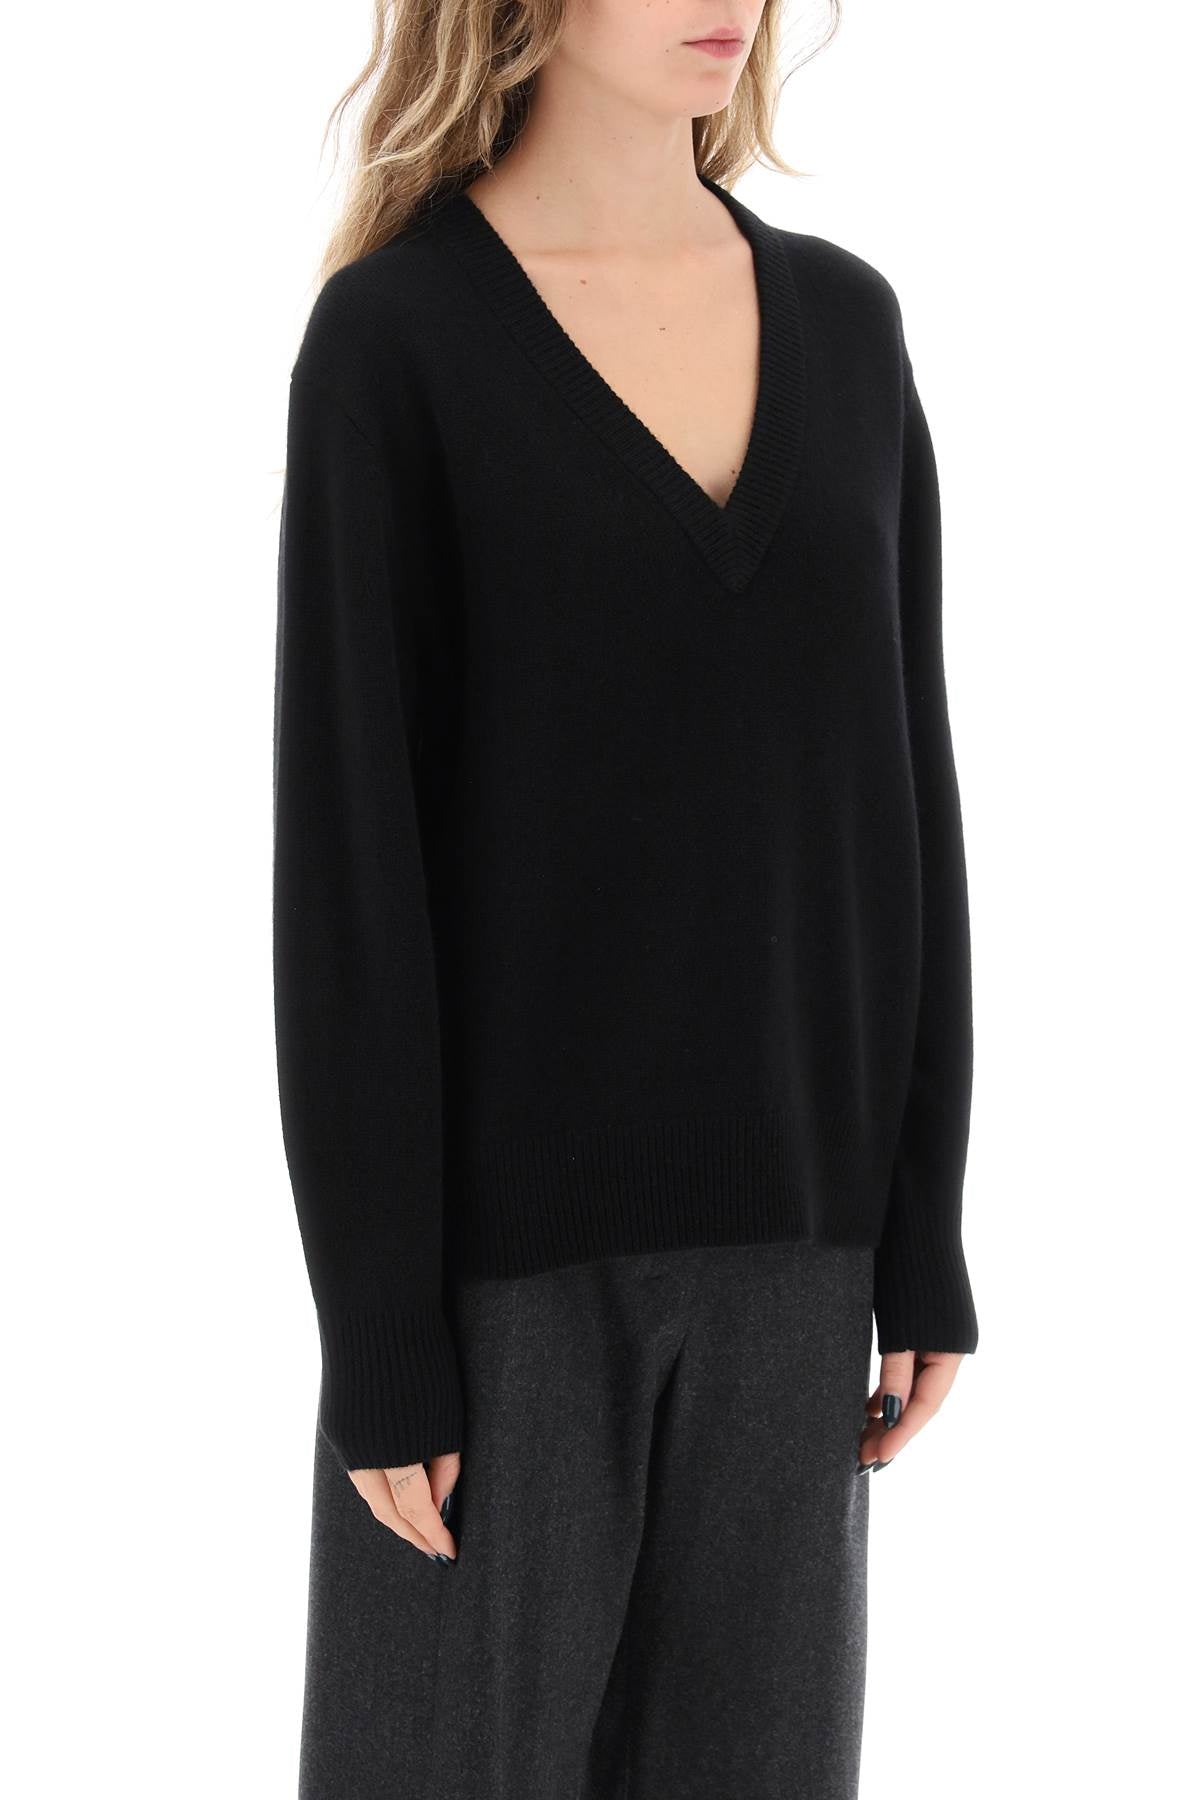 Guest in residence the v cashmere sweater-1